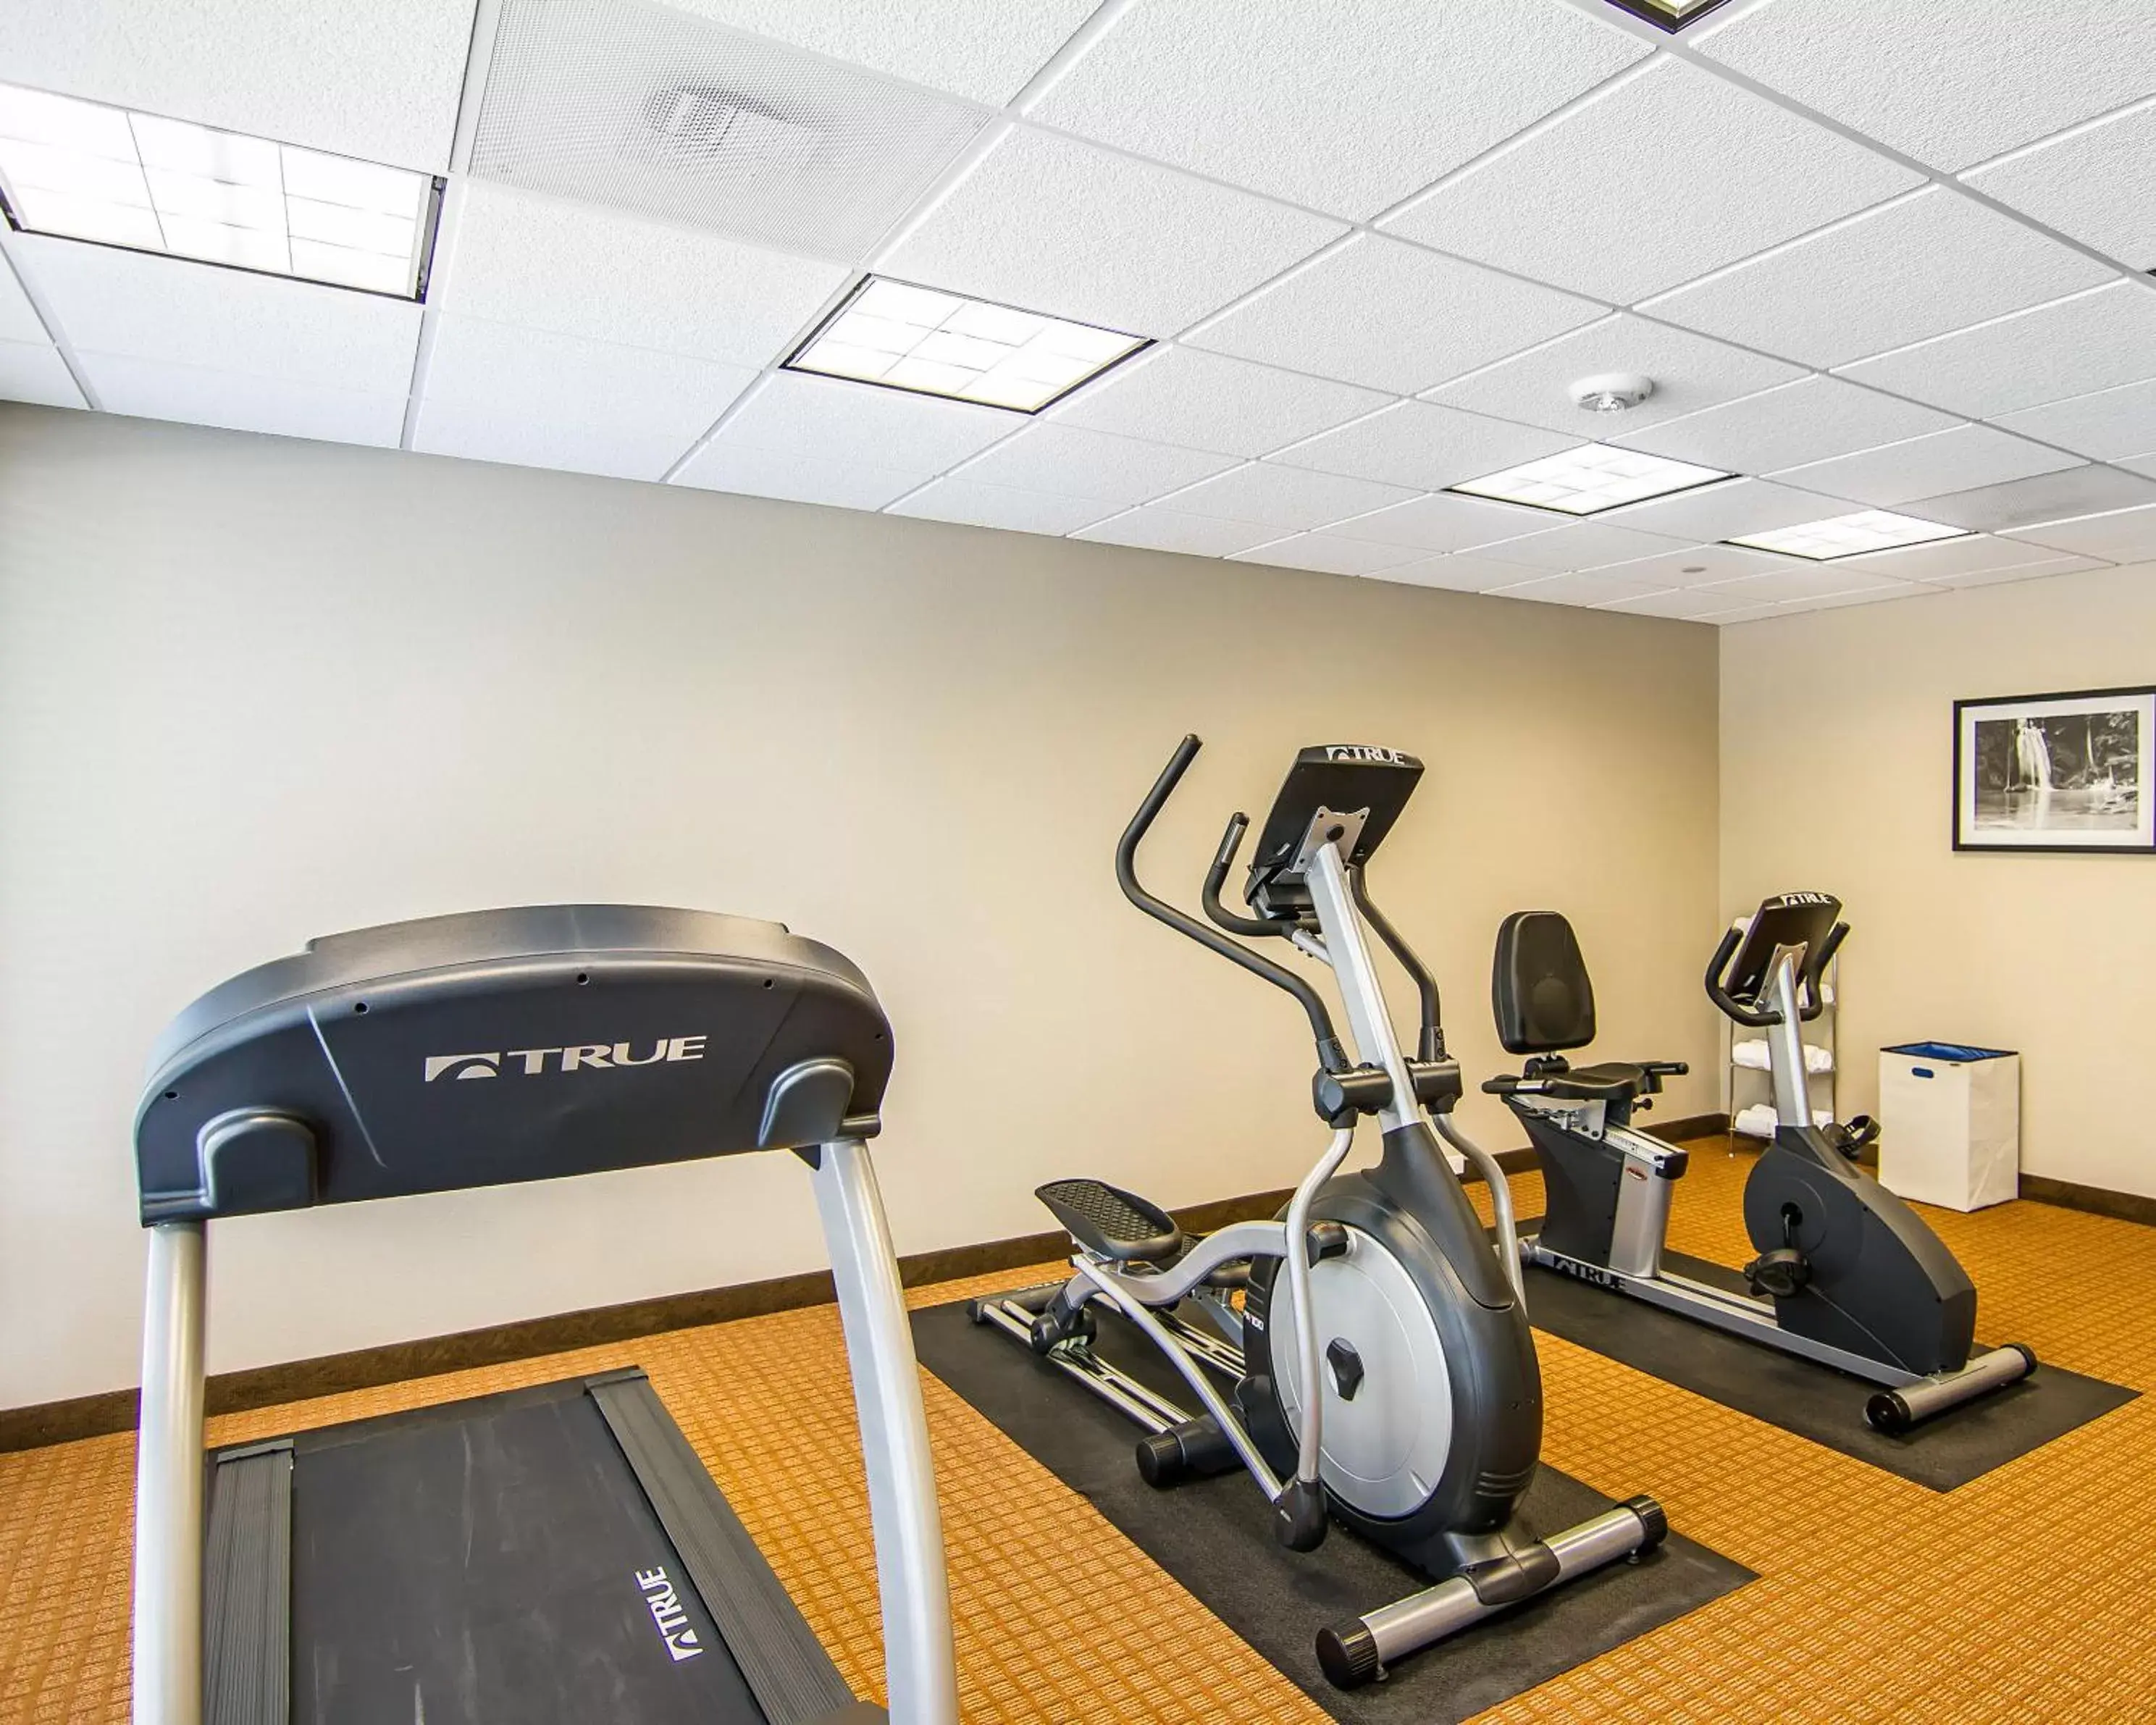 Fitness centre/facilities, Fitness Center/Facilities in MainStay Suites Lufkin